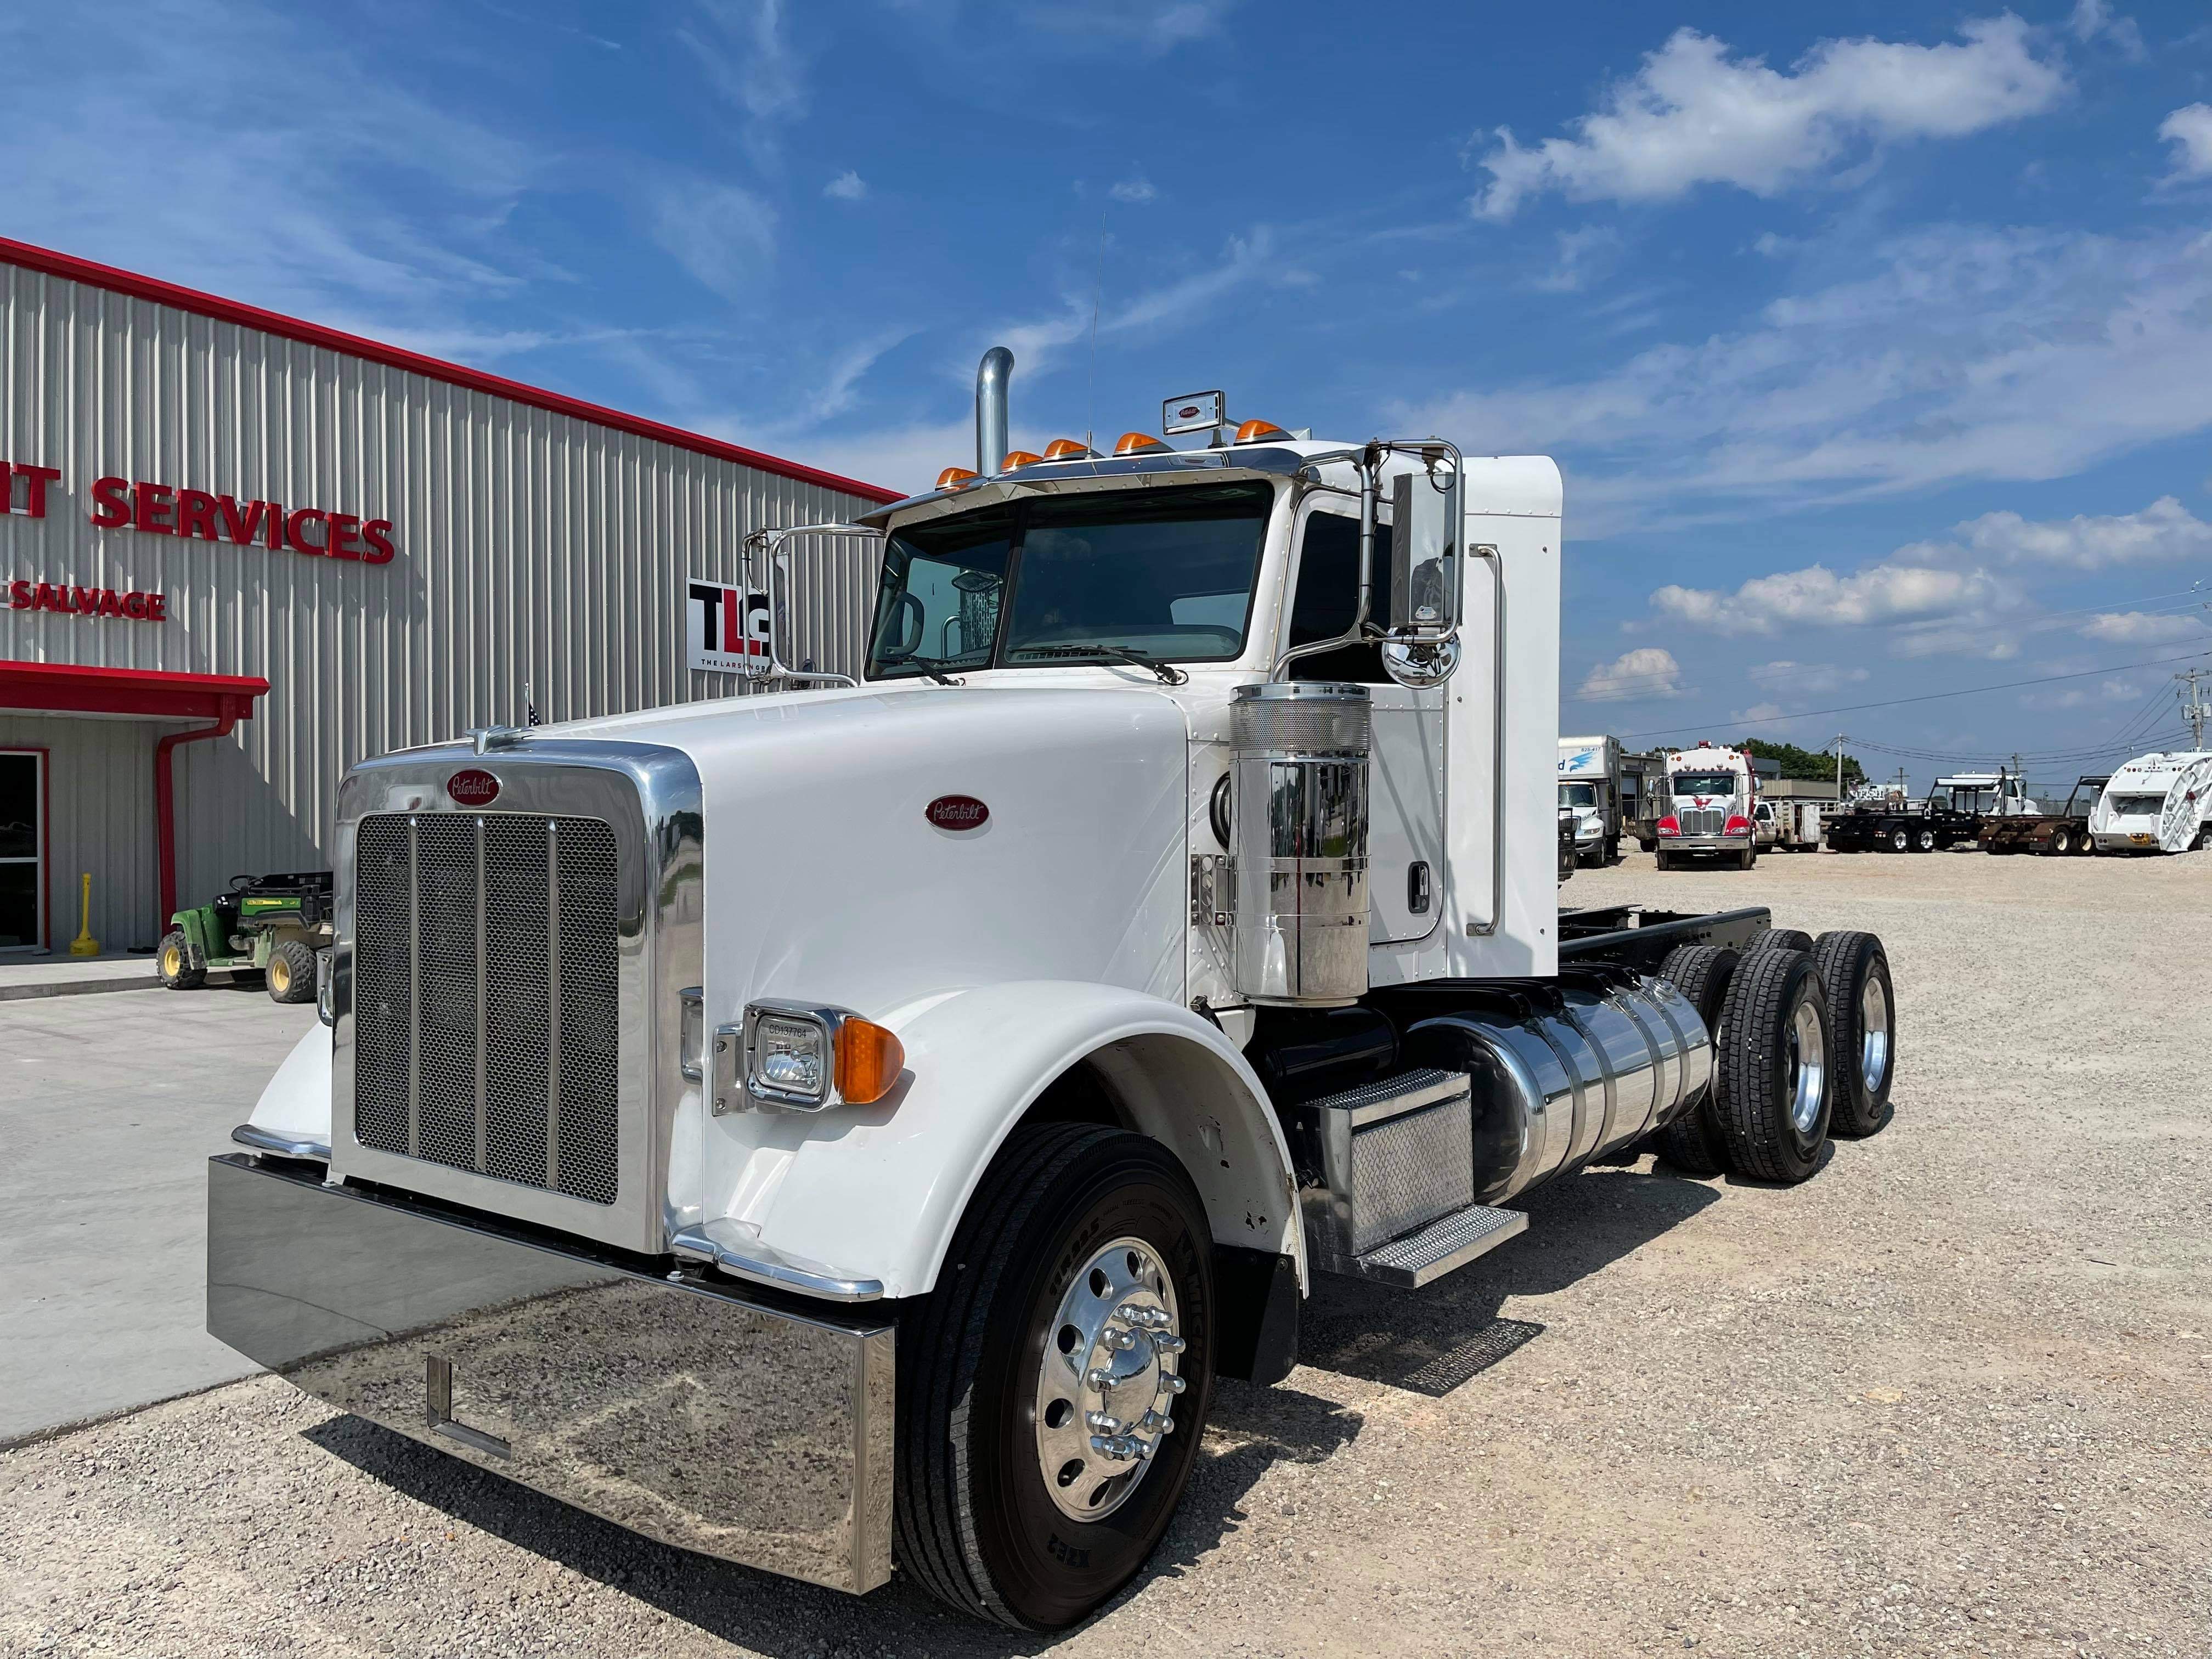 Used Heavy Duty Trucks For Sale near Cleveland, Cincinnati, and Akron, Ohio  - Hissong Group Dealership